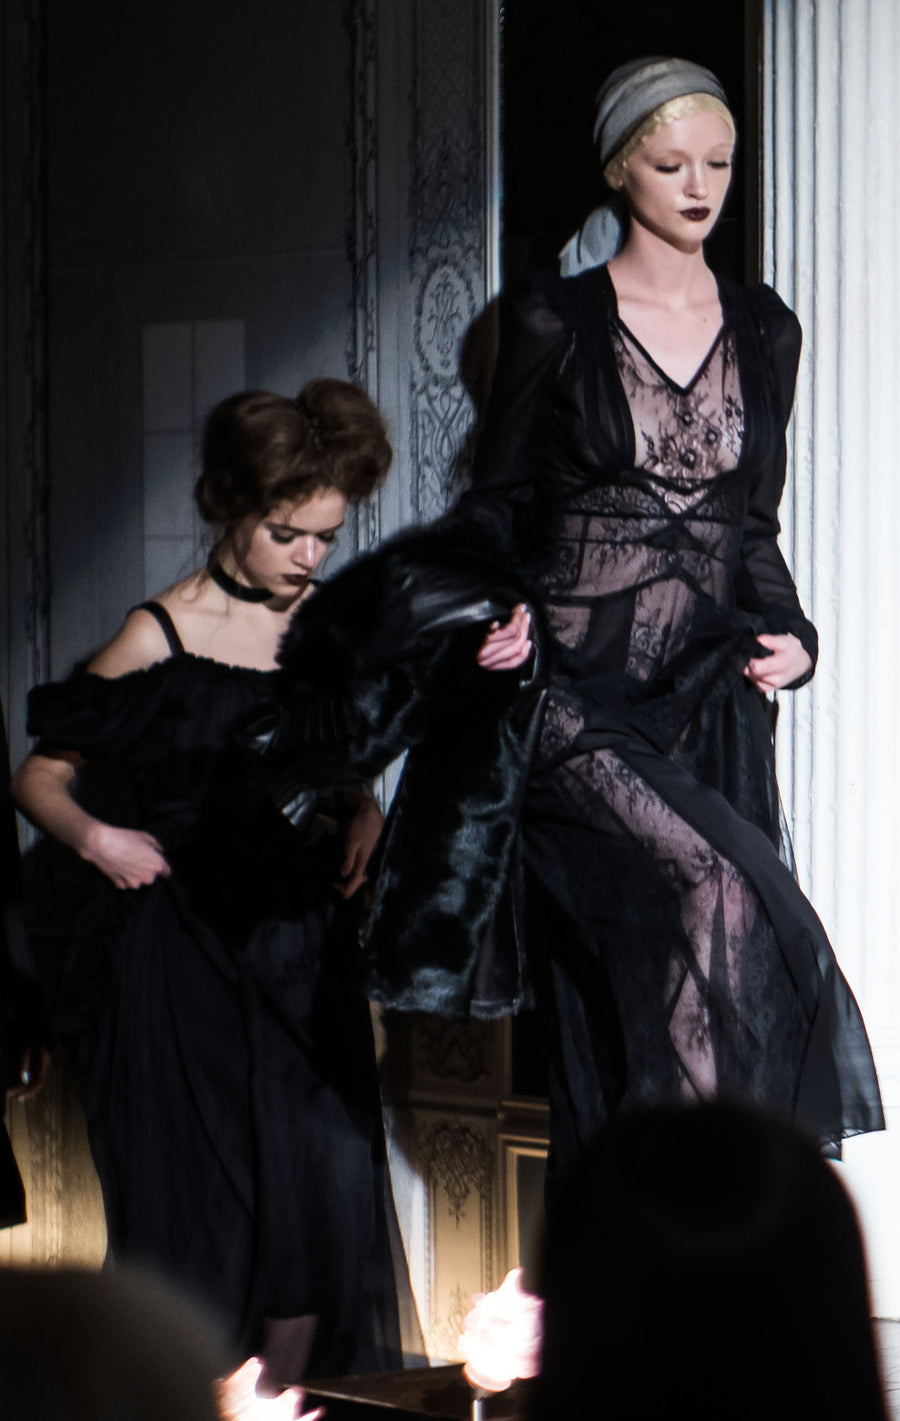 Black French Solstiss Lace Lover Dress The Creator Jung Black Leather Edwardian Collar Shearling Fur Coat  Wendy Nichol Clothing Fashion Designer Handmade in NYC AW14 Ready to Wear Fashion Runway Show Custom Tailoring Made to Measure